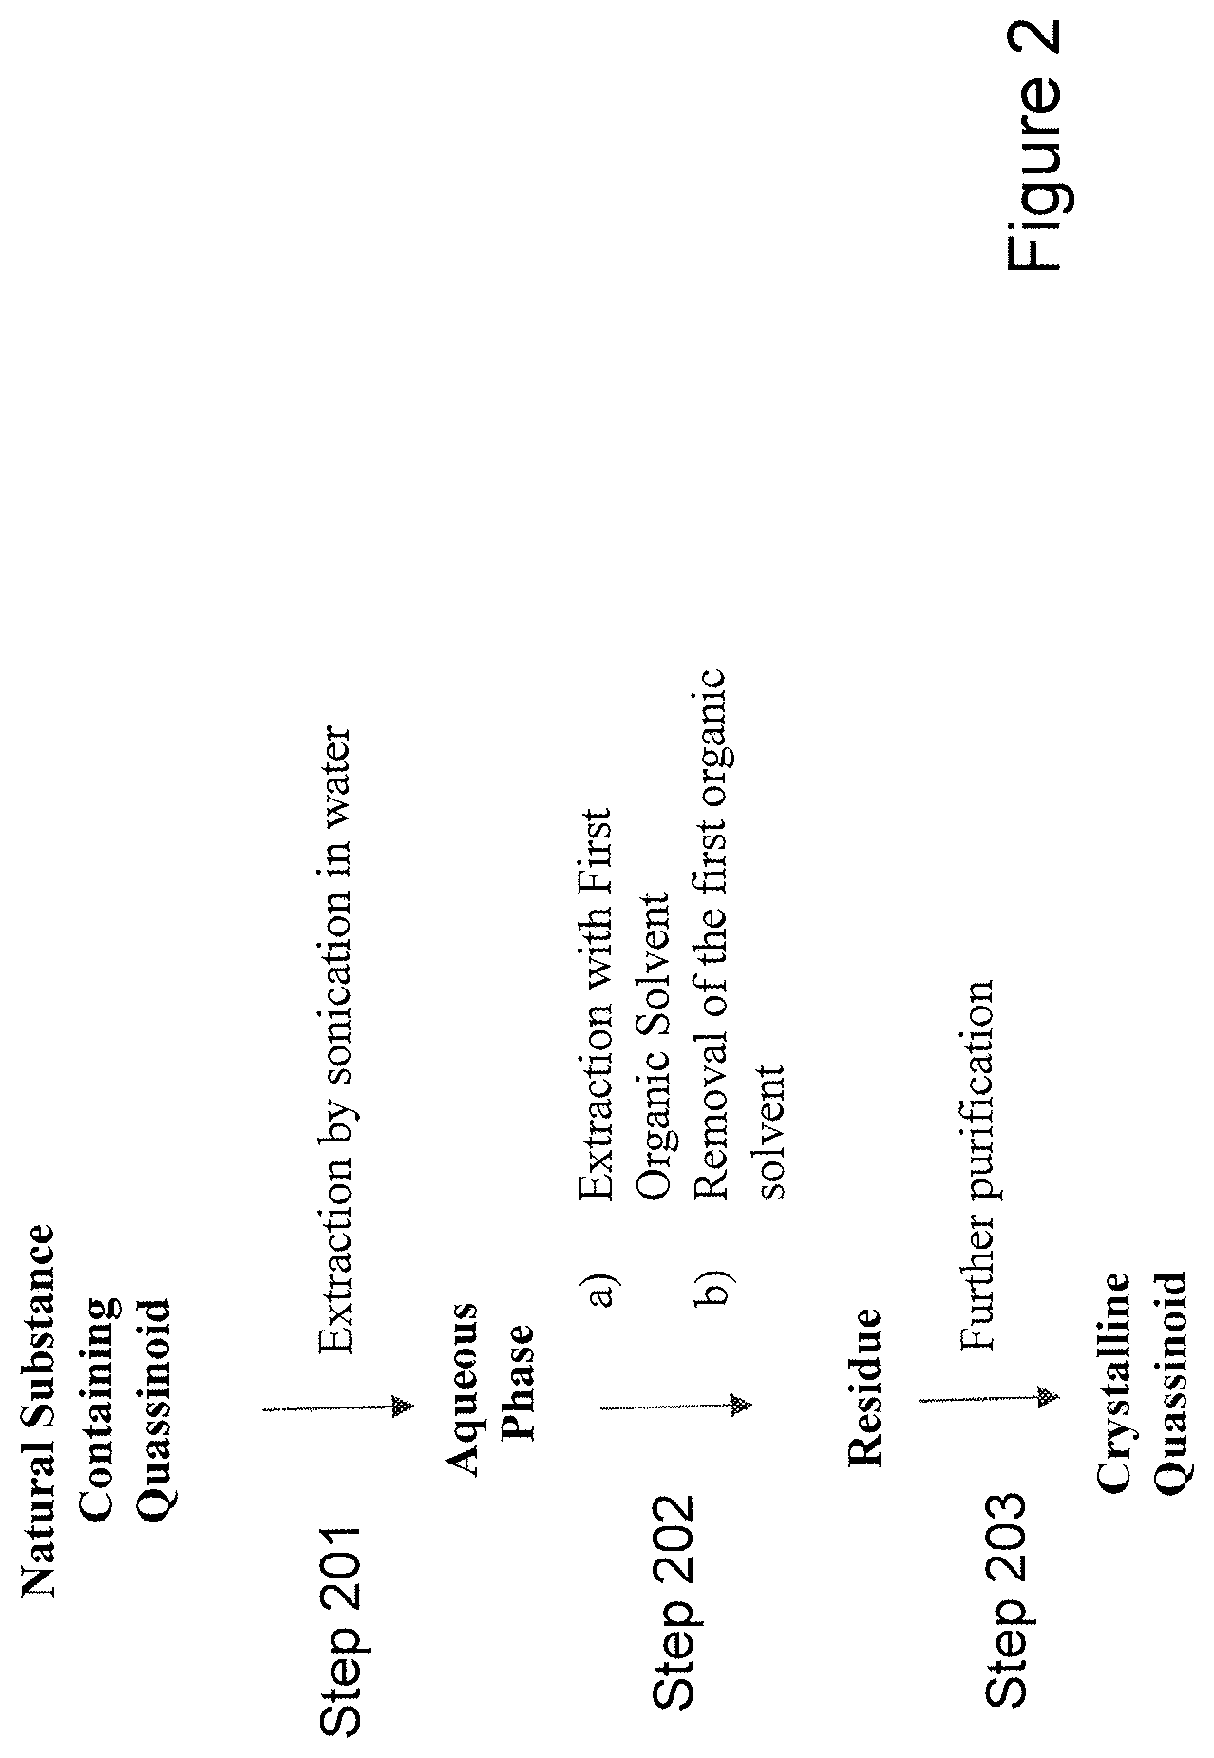 Simplified process to extract quassinoids